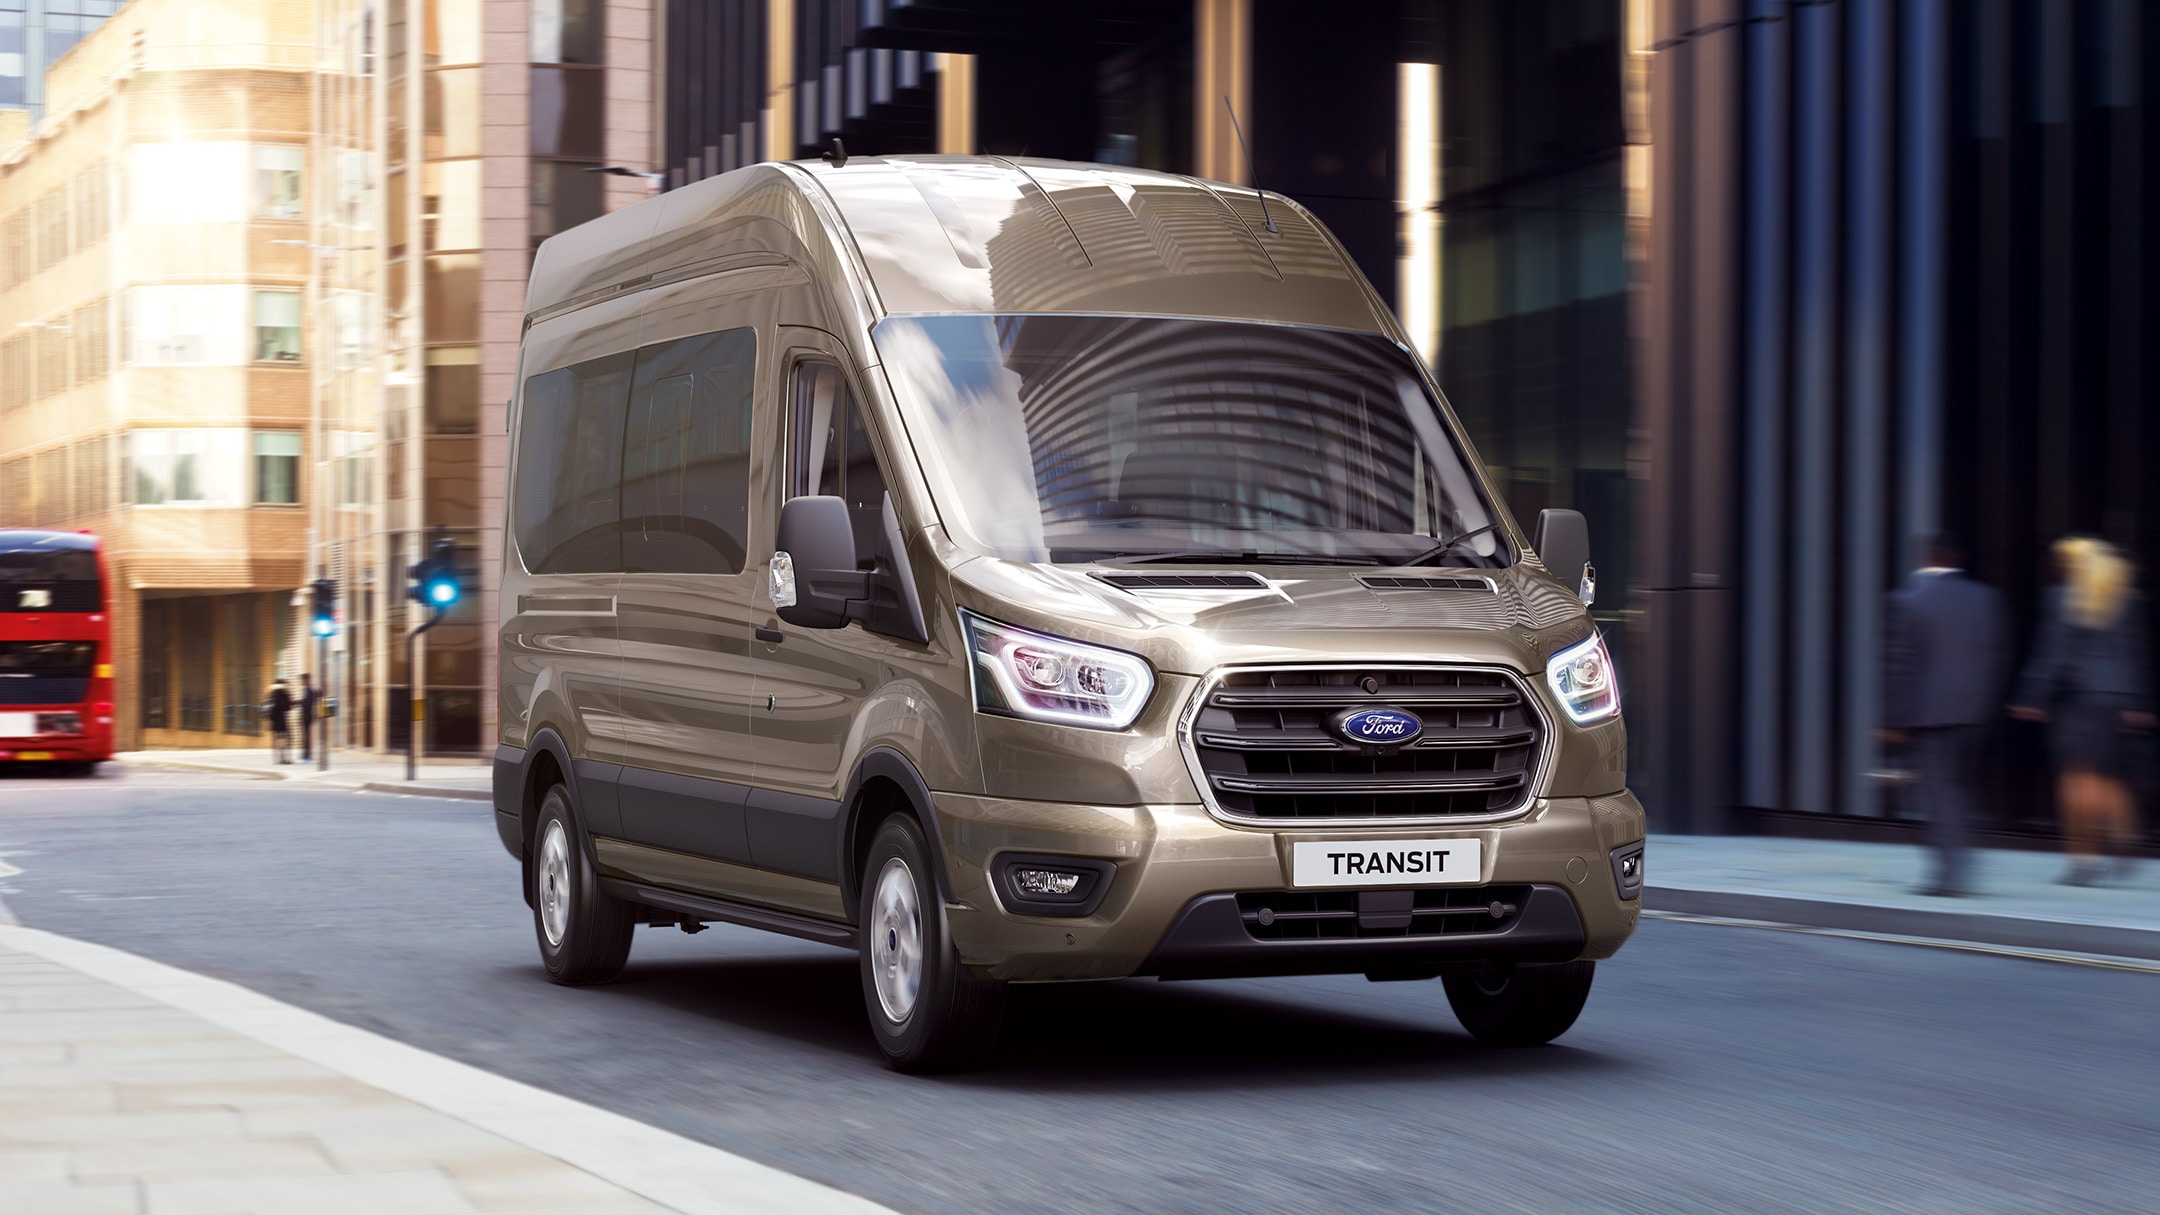 All New Ford Transit Minibus side view 